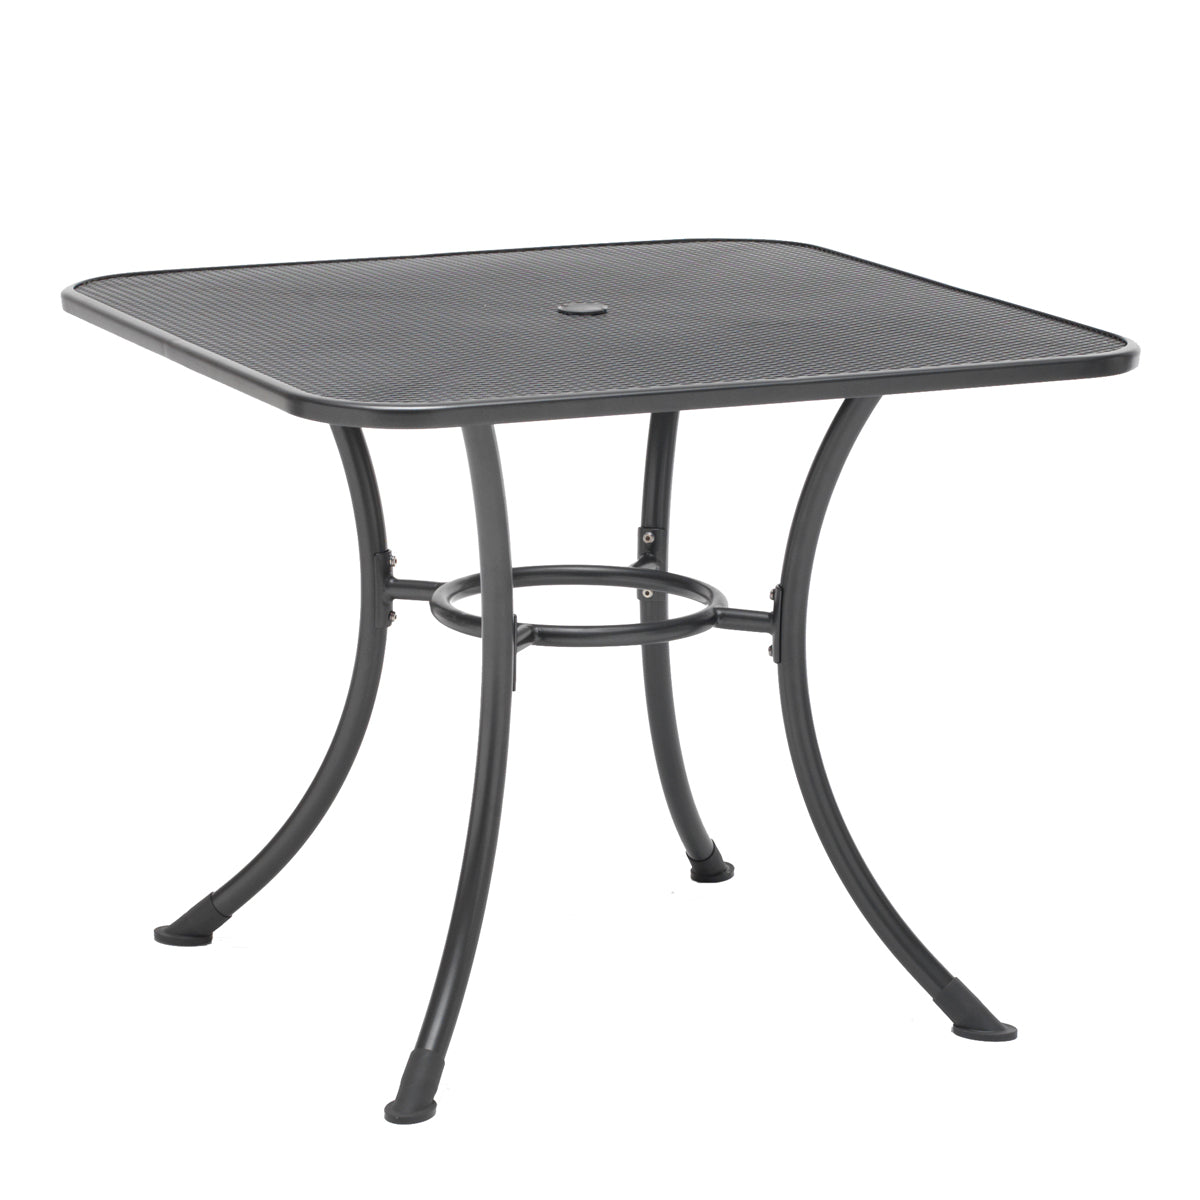 Wrought iron square table with floor levelers 